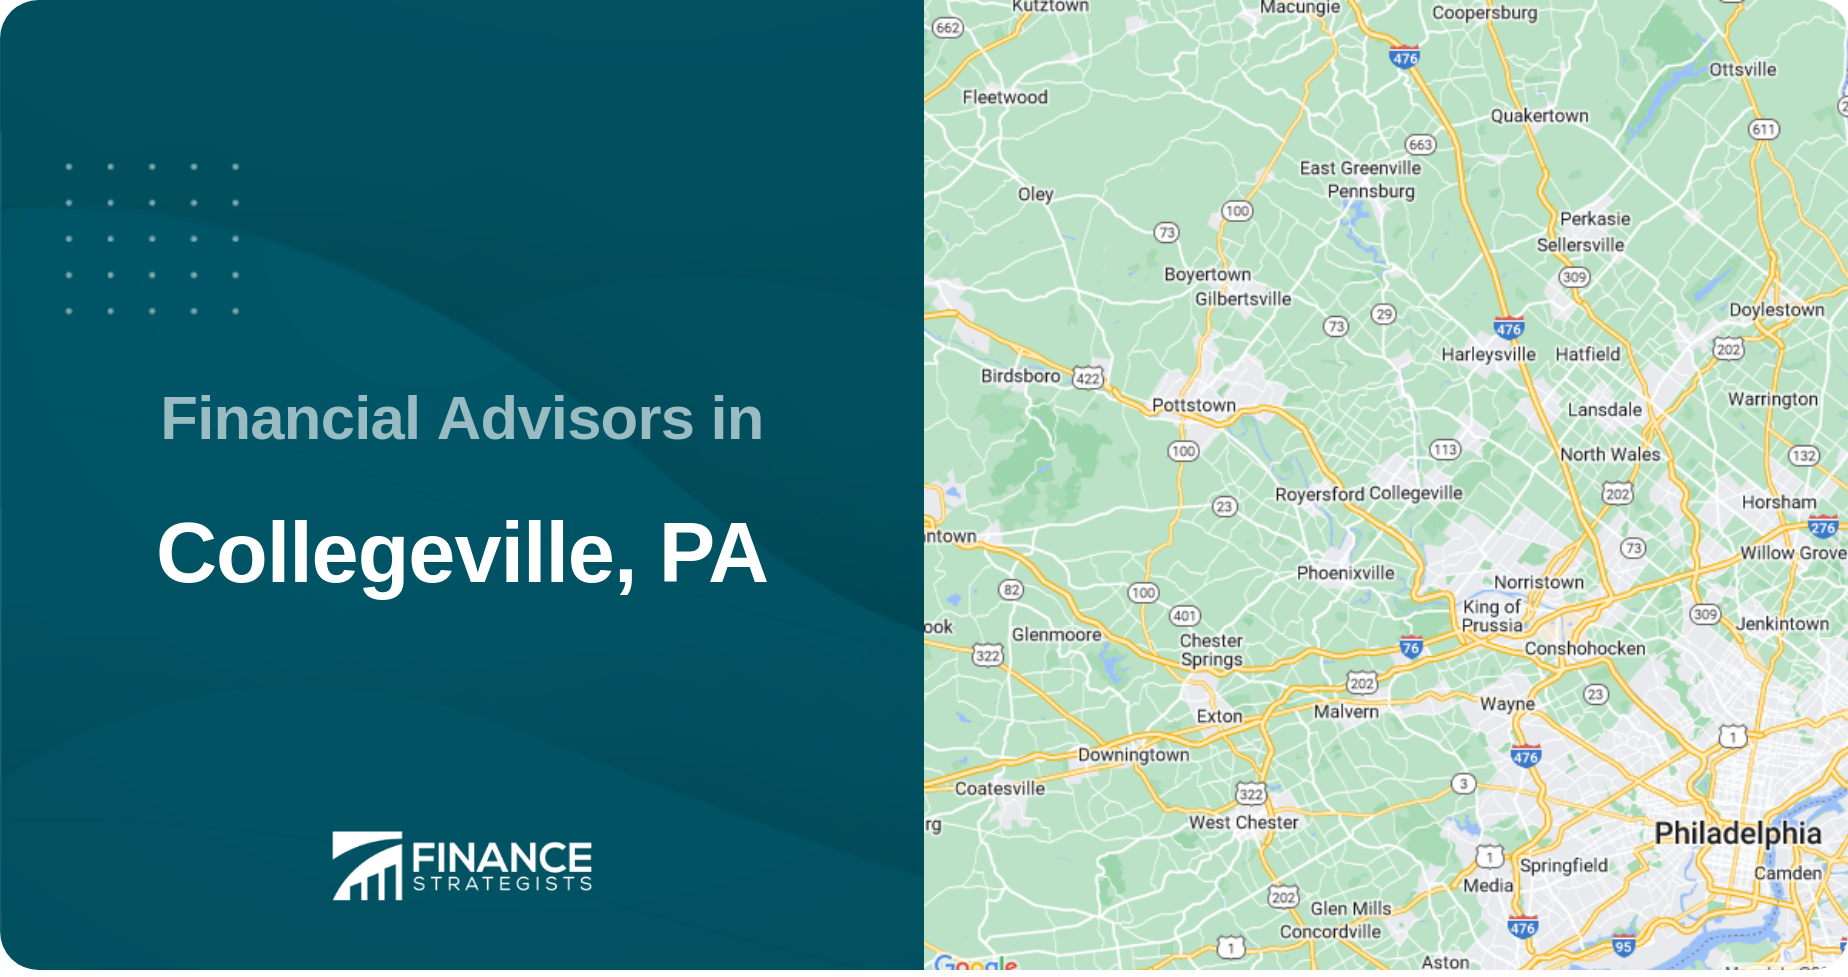 Financial Advisors in Collegeville, PA